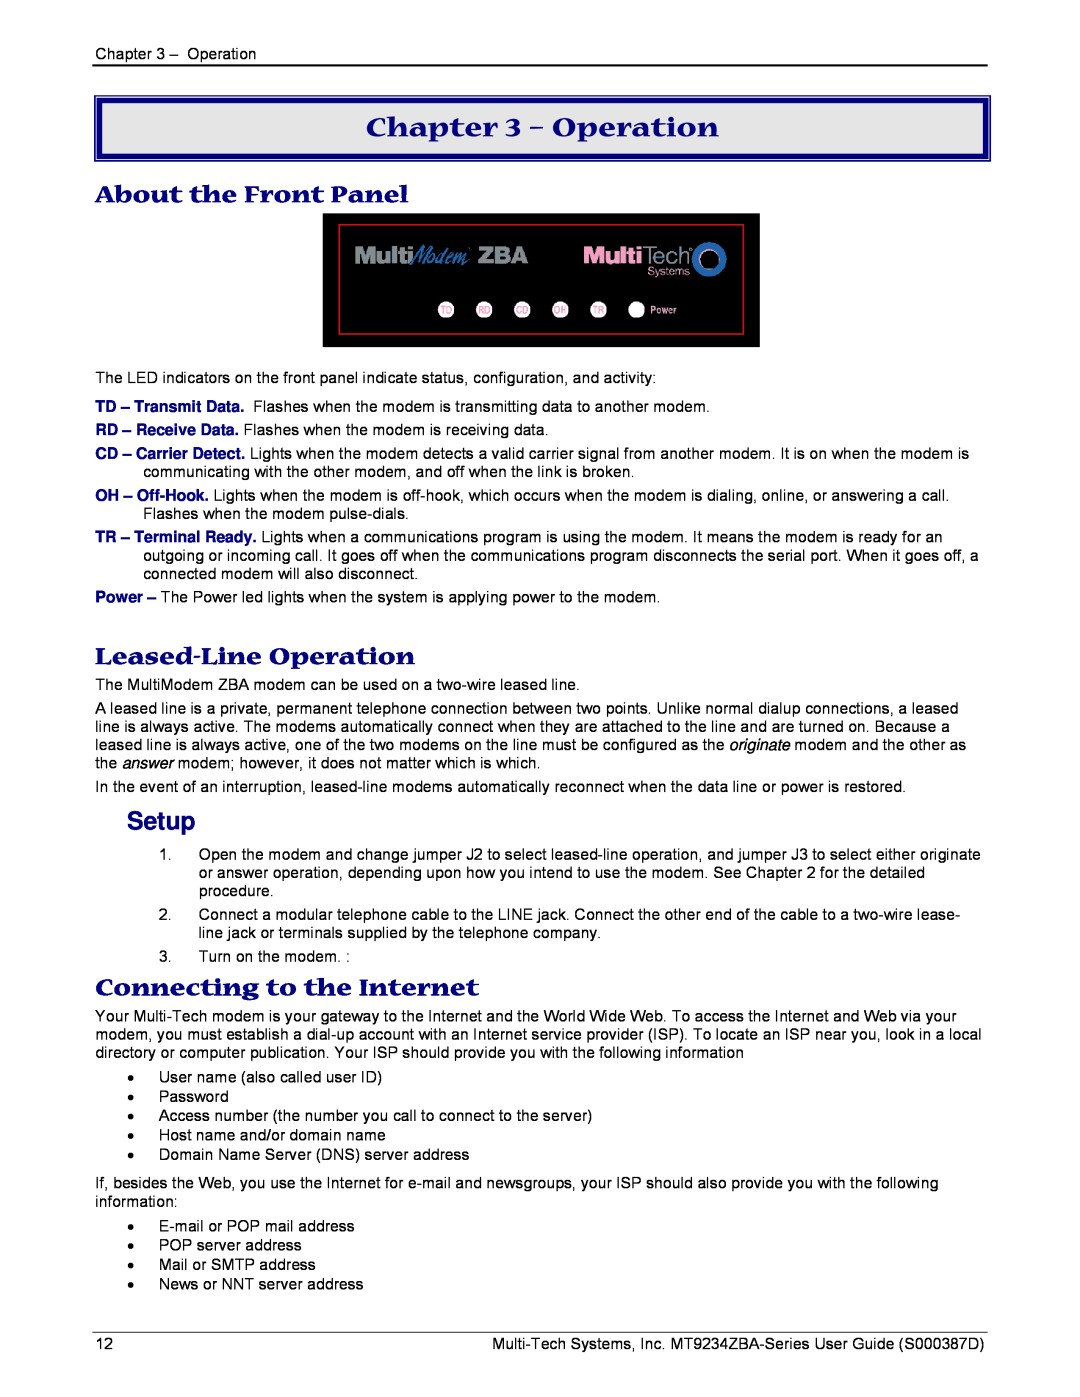 Multi-Tech Systems MT9234ZBA manual About the Front Panel, Leased-Line Operation, Setup, Connecting to the Internet 